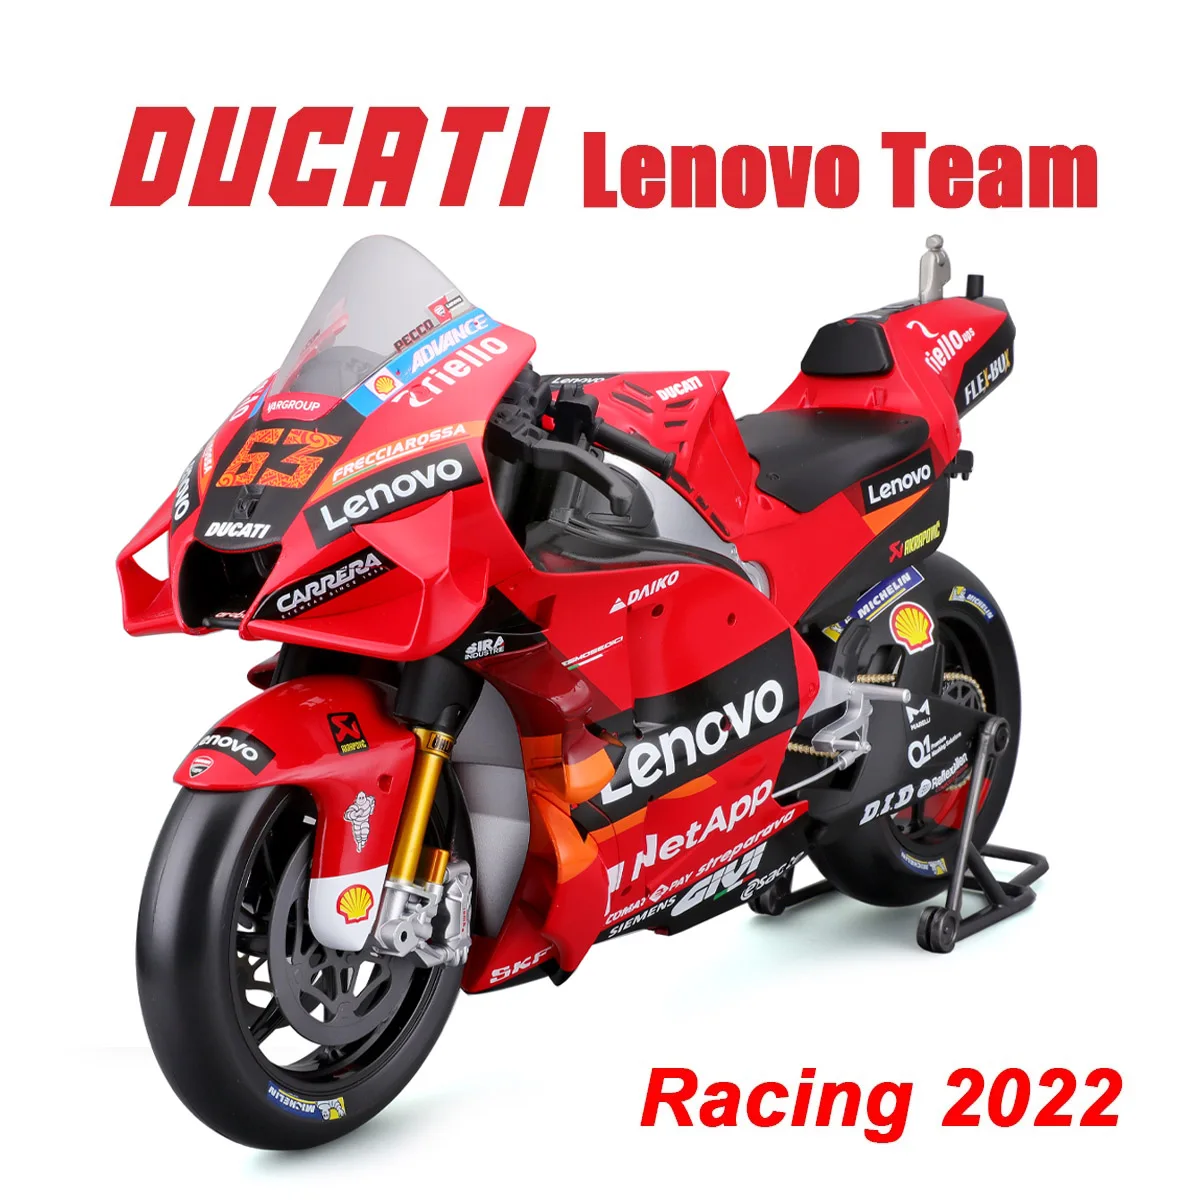 

Maisto 1:18 GP Racing 2022 Ducati Lenovo Team Die Cast Vehicles Collectible Motorcycle Model Toys